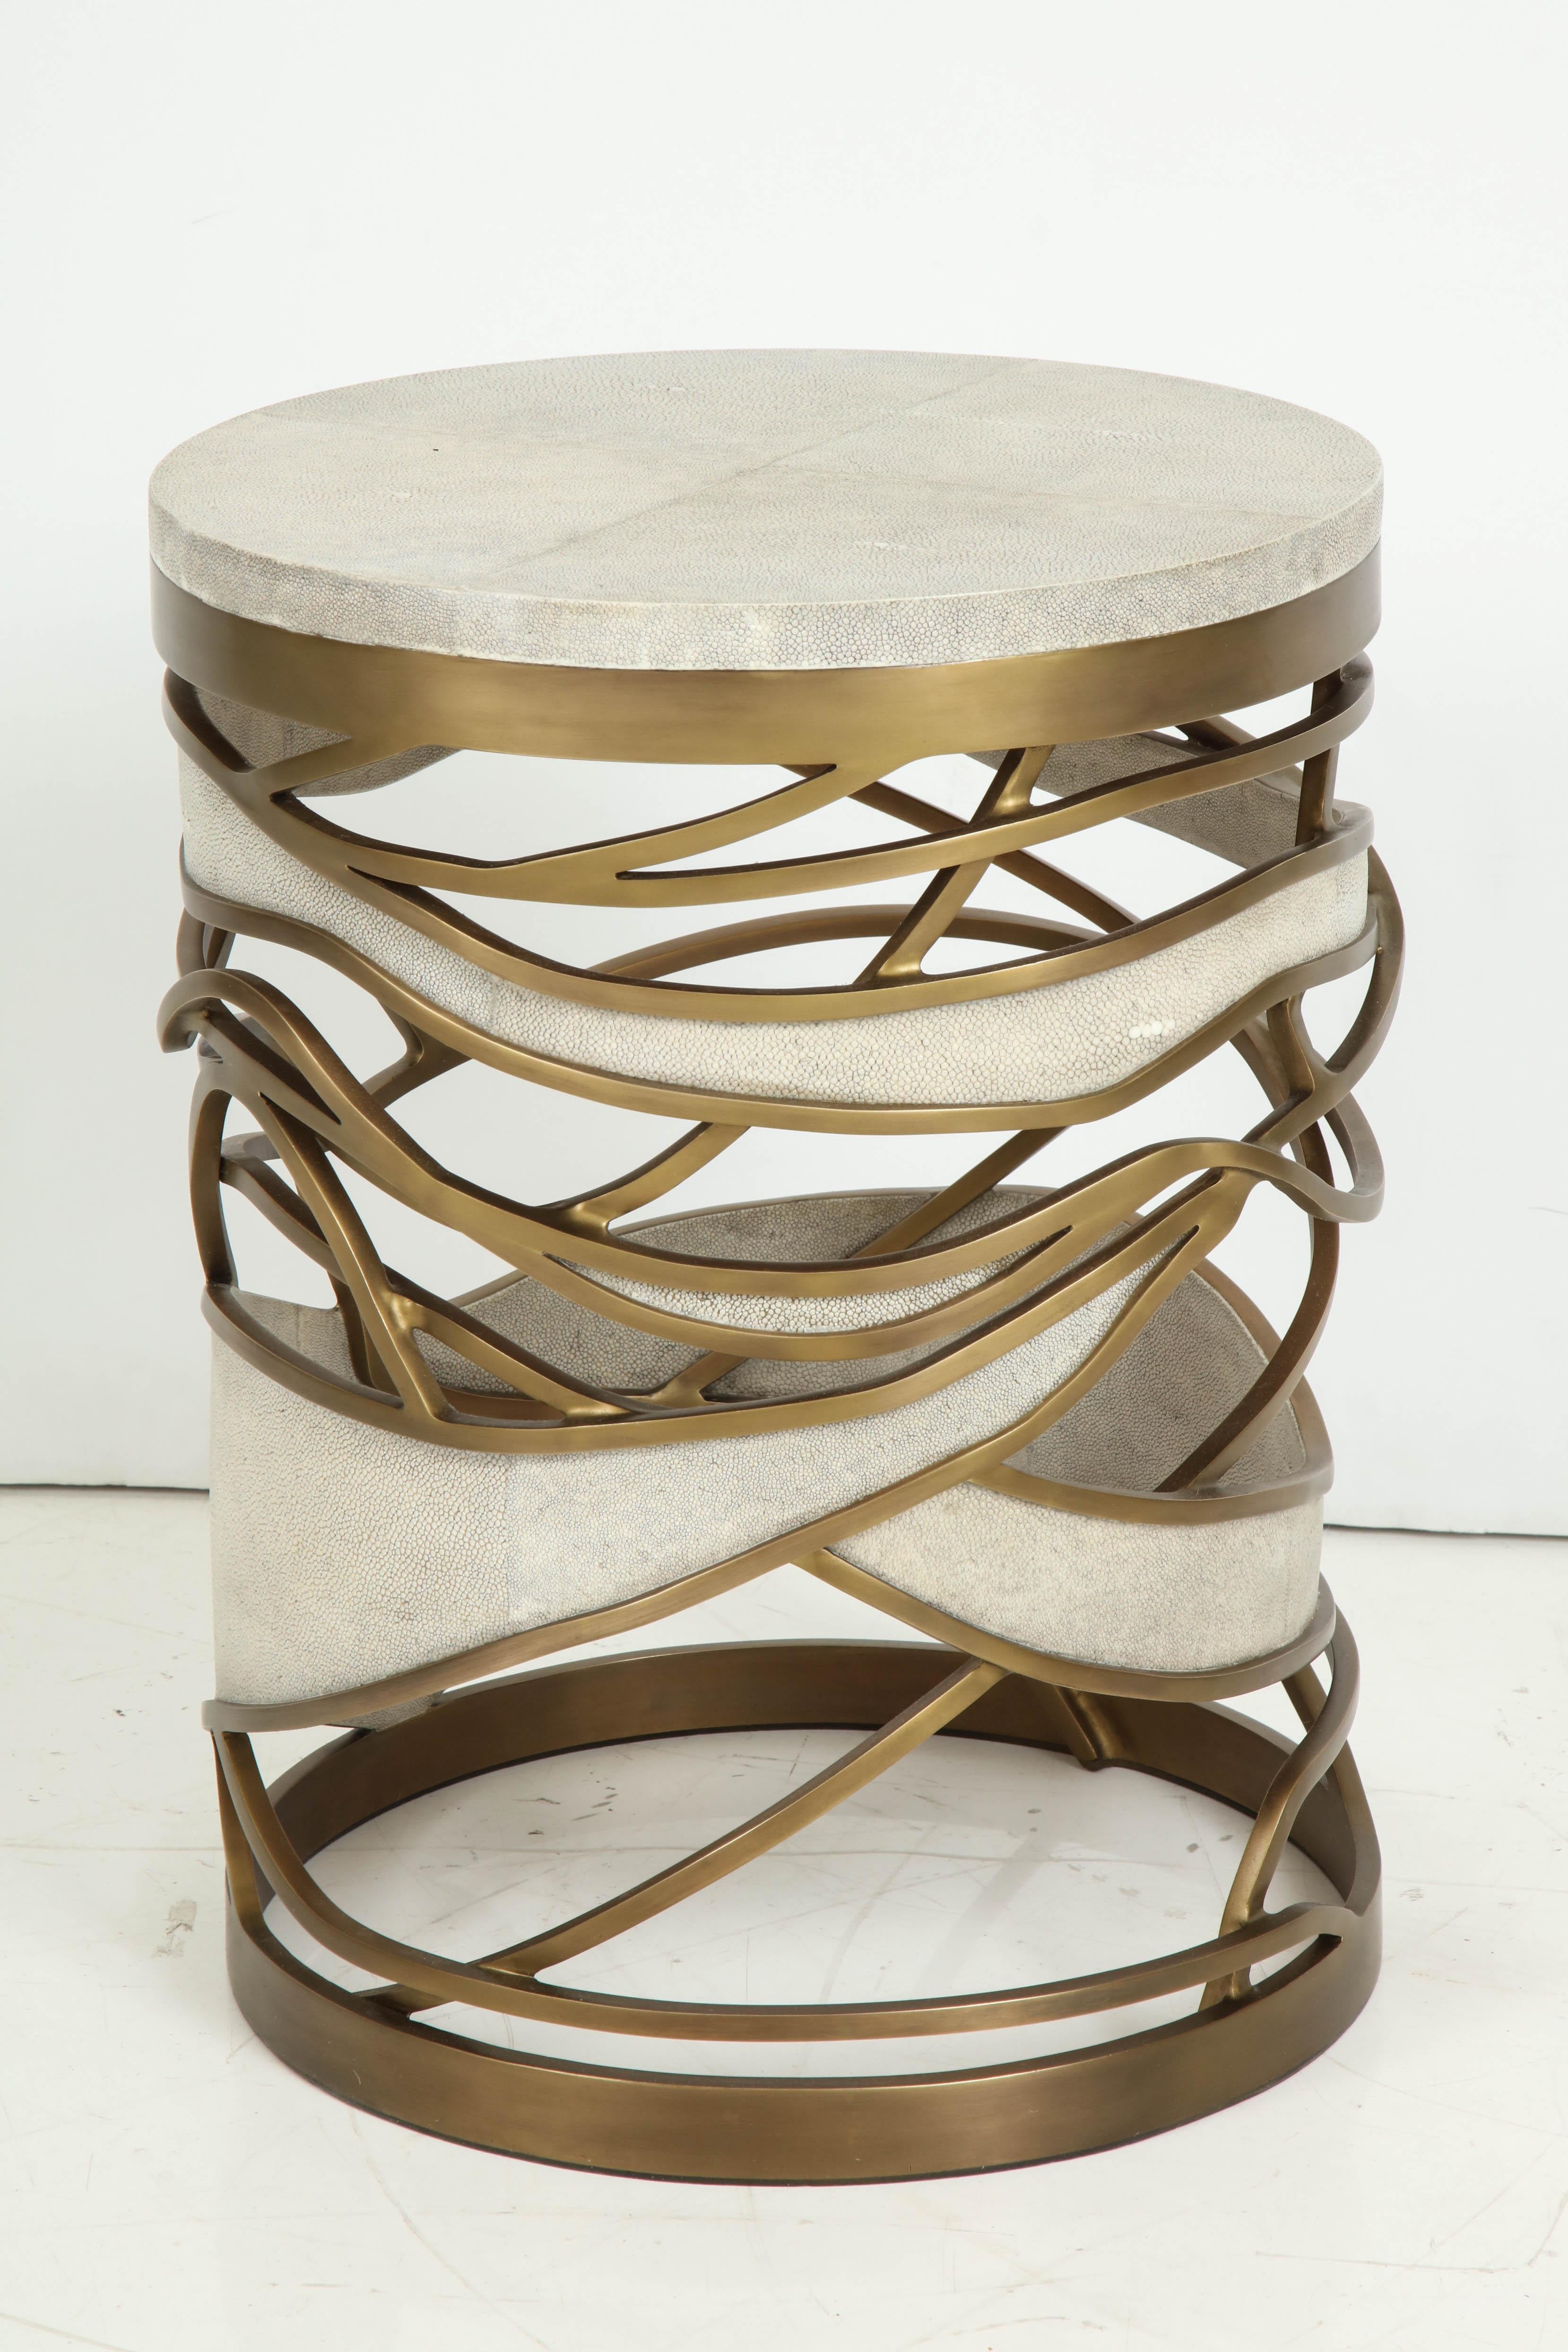 Shagreen Stool or Side Table with Brass Details, Contemporary, Cream Shagreen 3